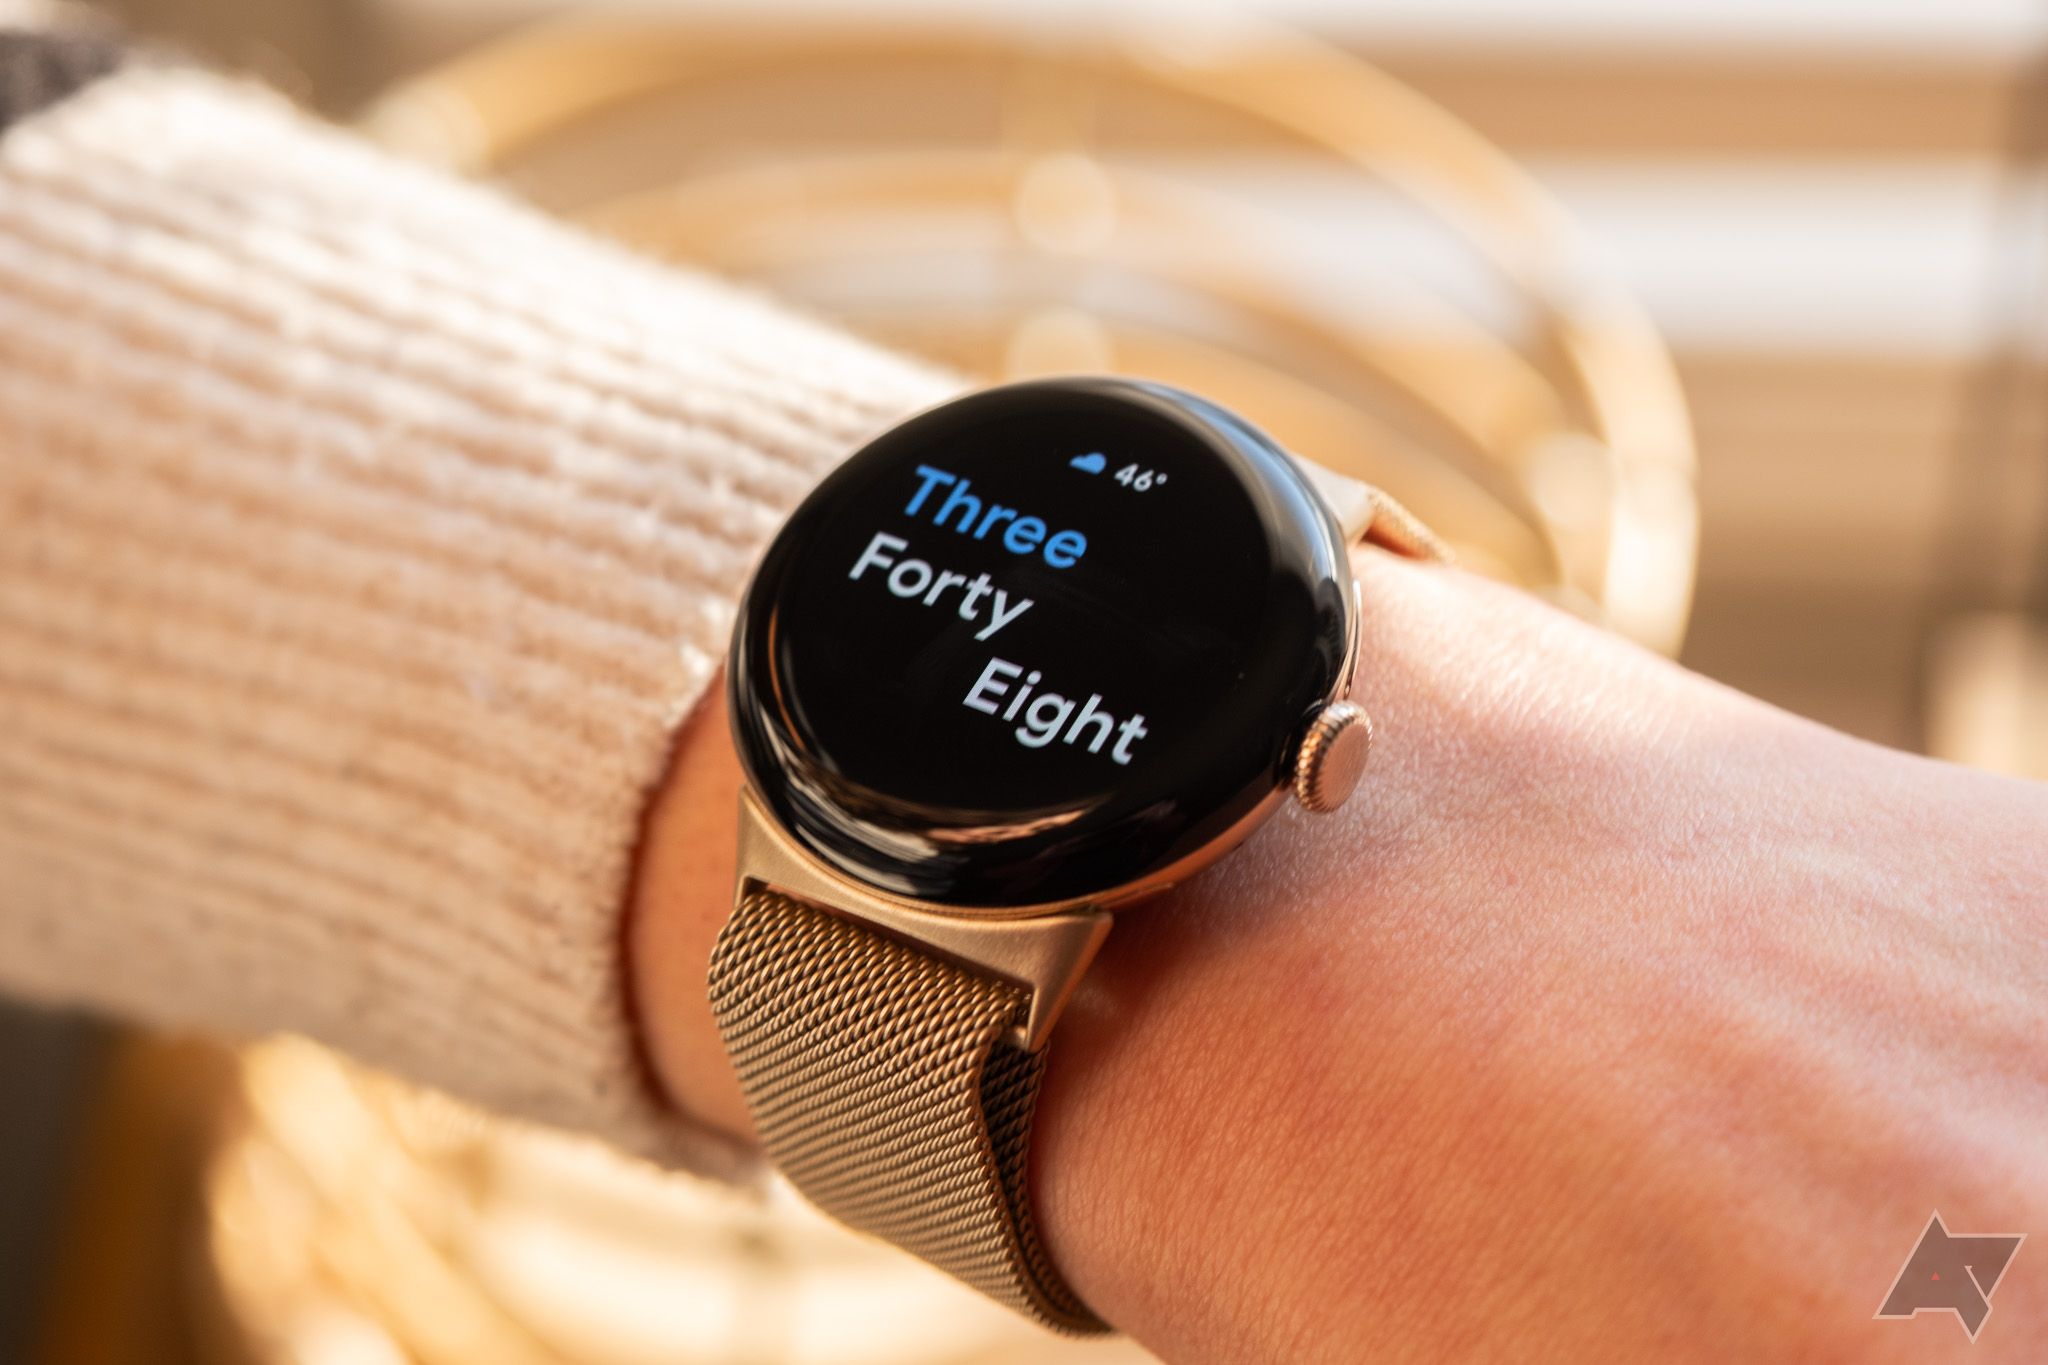 Samsung Galaxy Watch 4 and 4 Classic buyer's guide - Android Authority